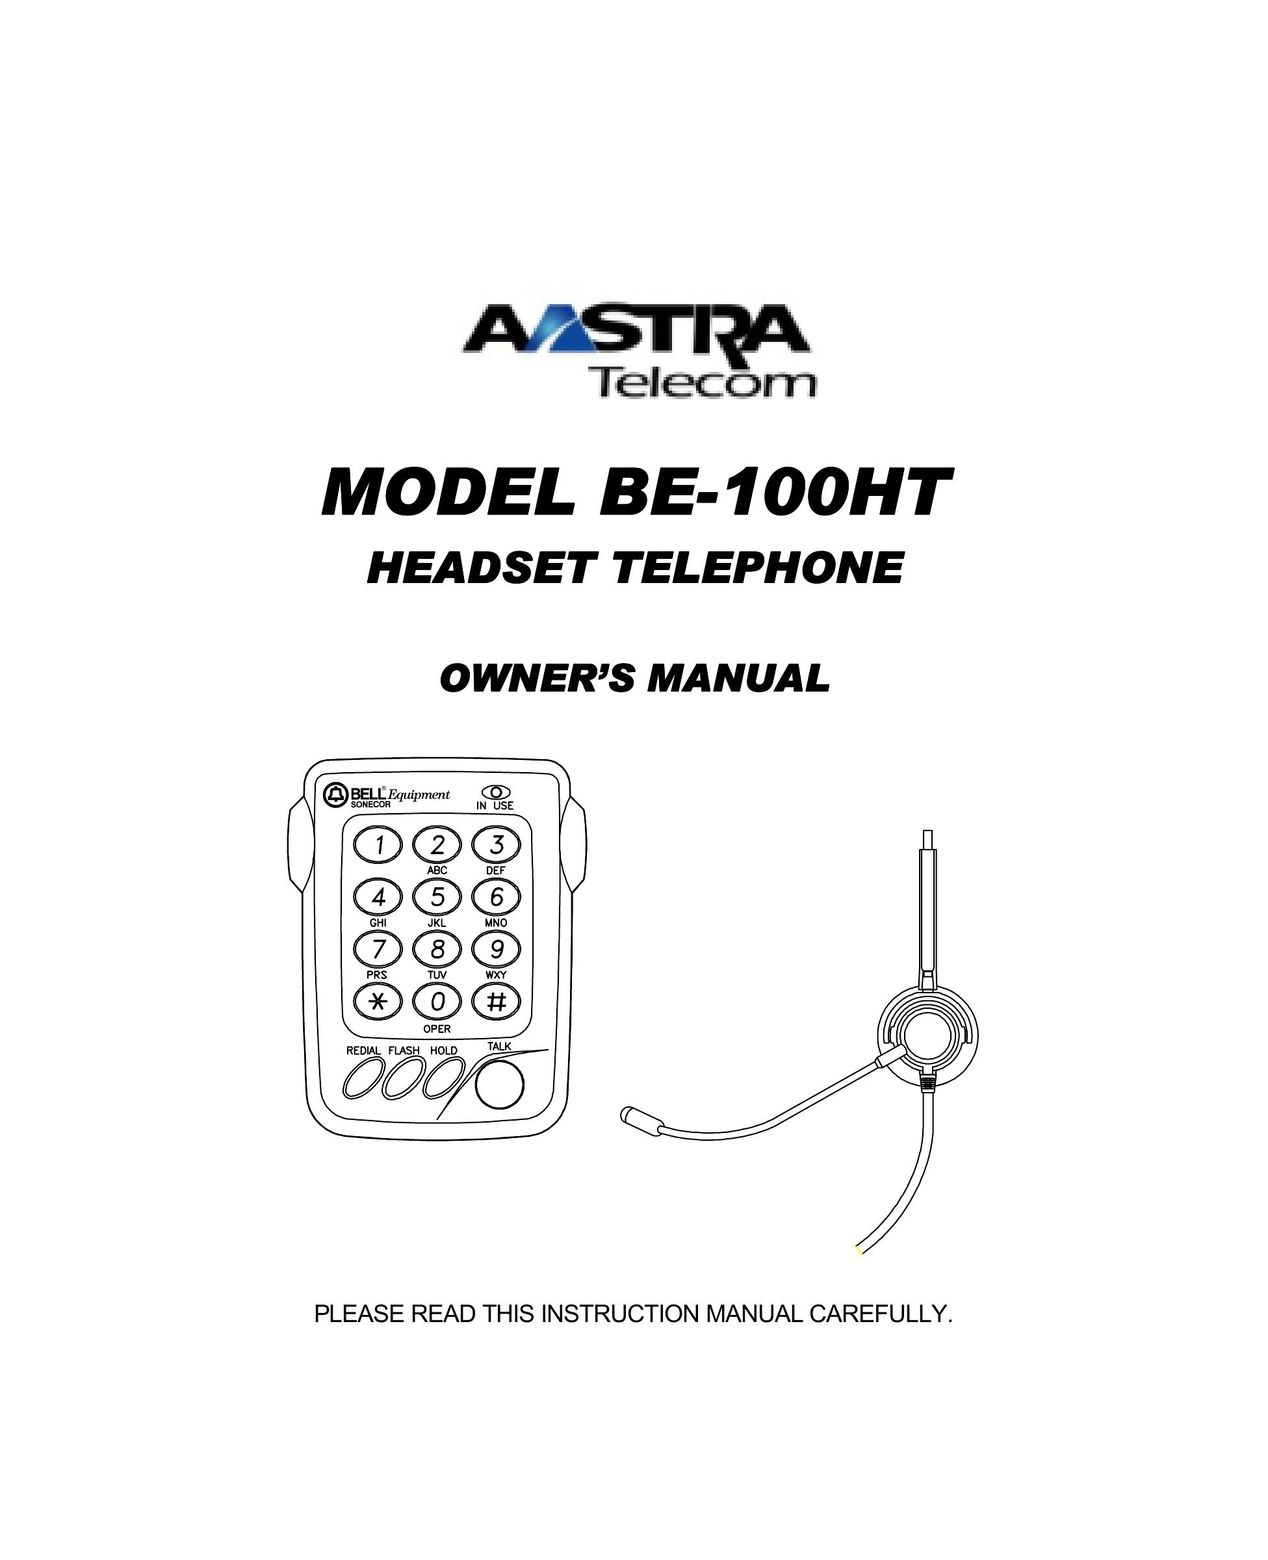 Aastra Telecom BE-100HT Corded Headset User Manual